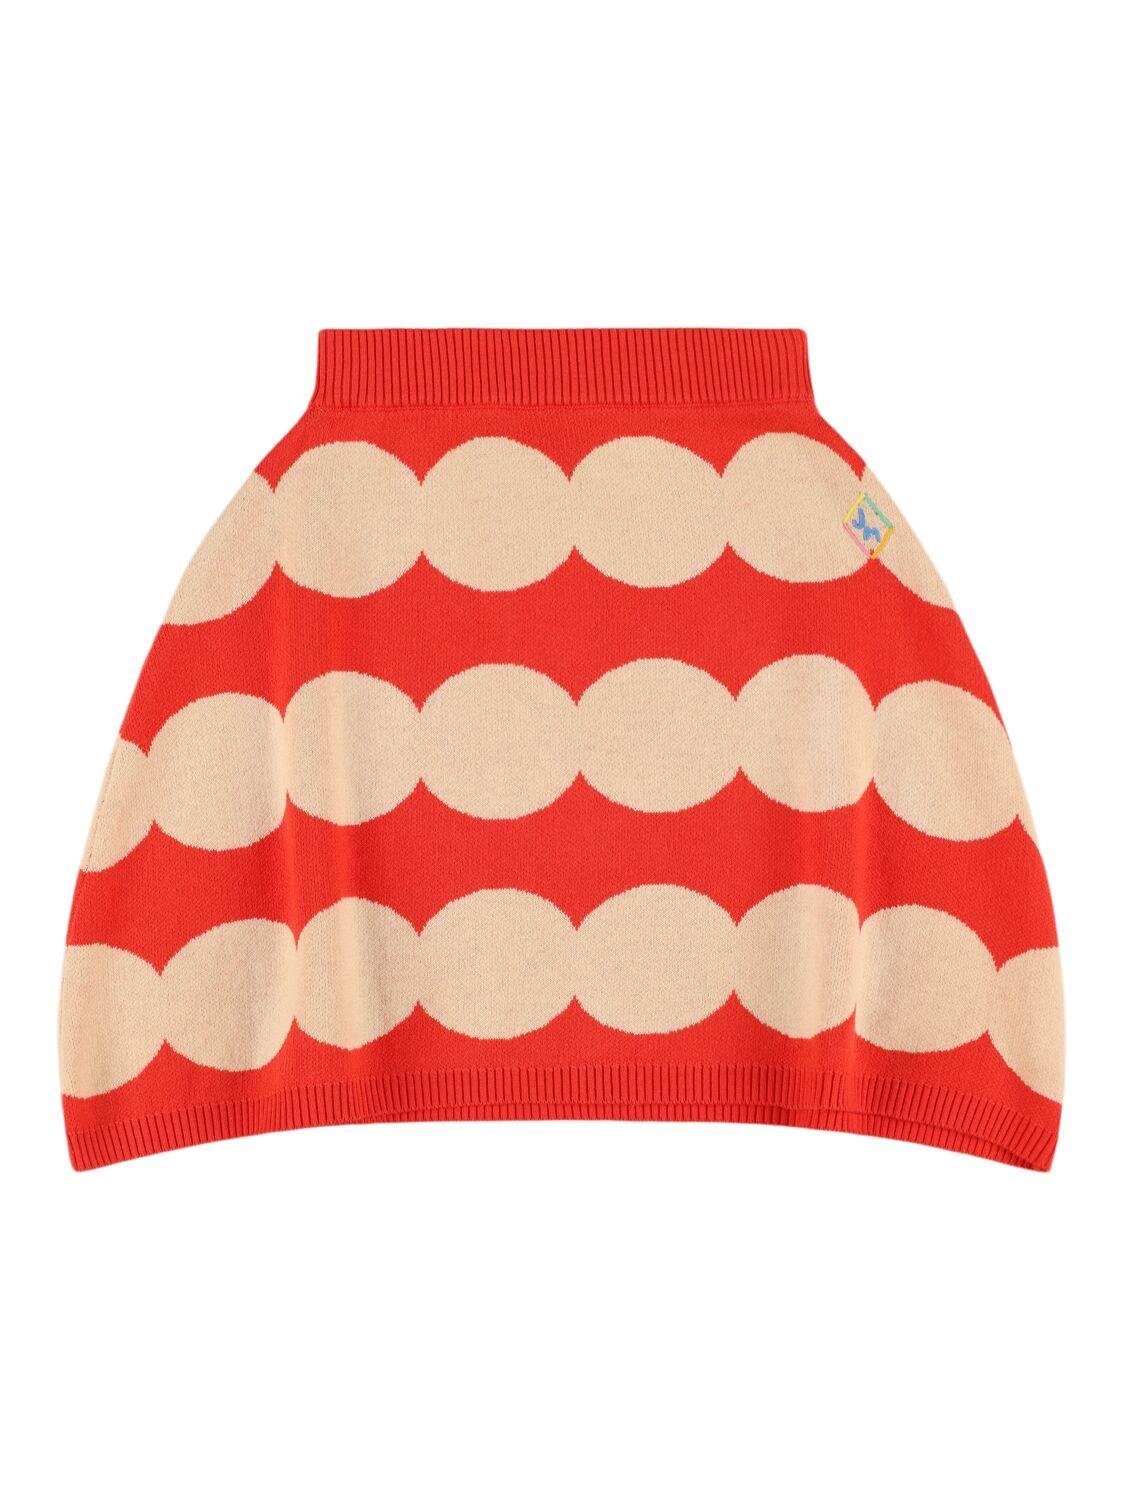 Knit Cotton Skirt by JELLYMALLOW